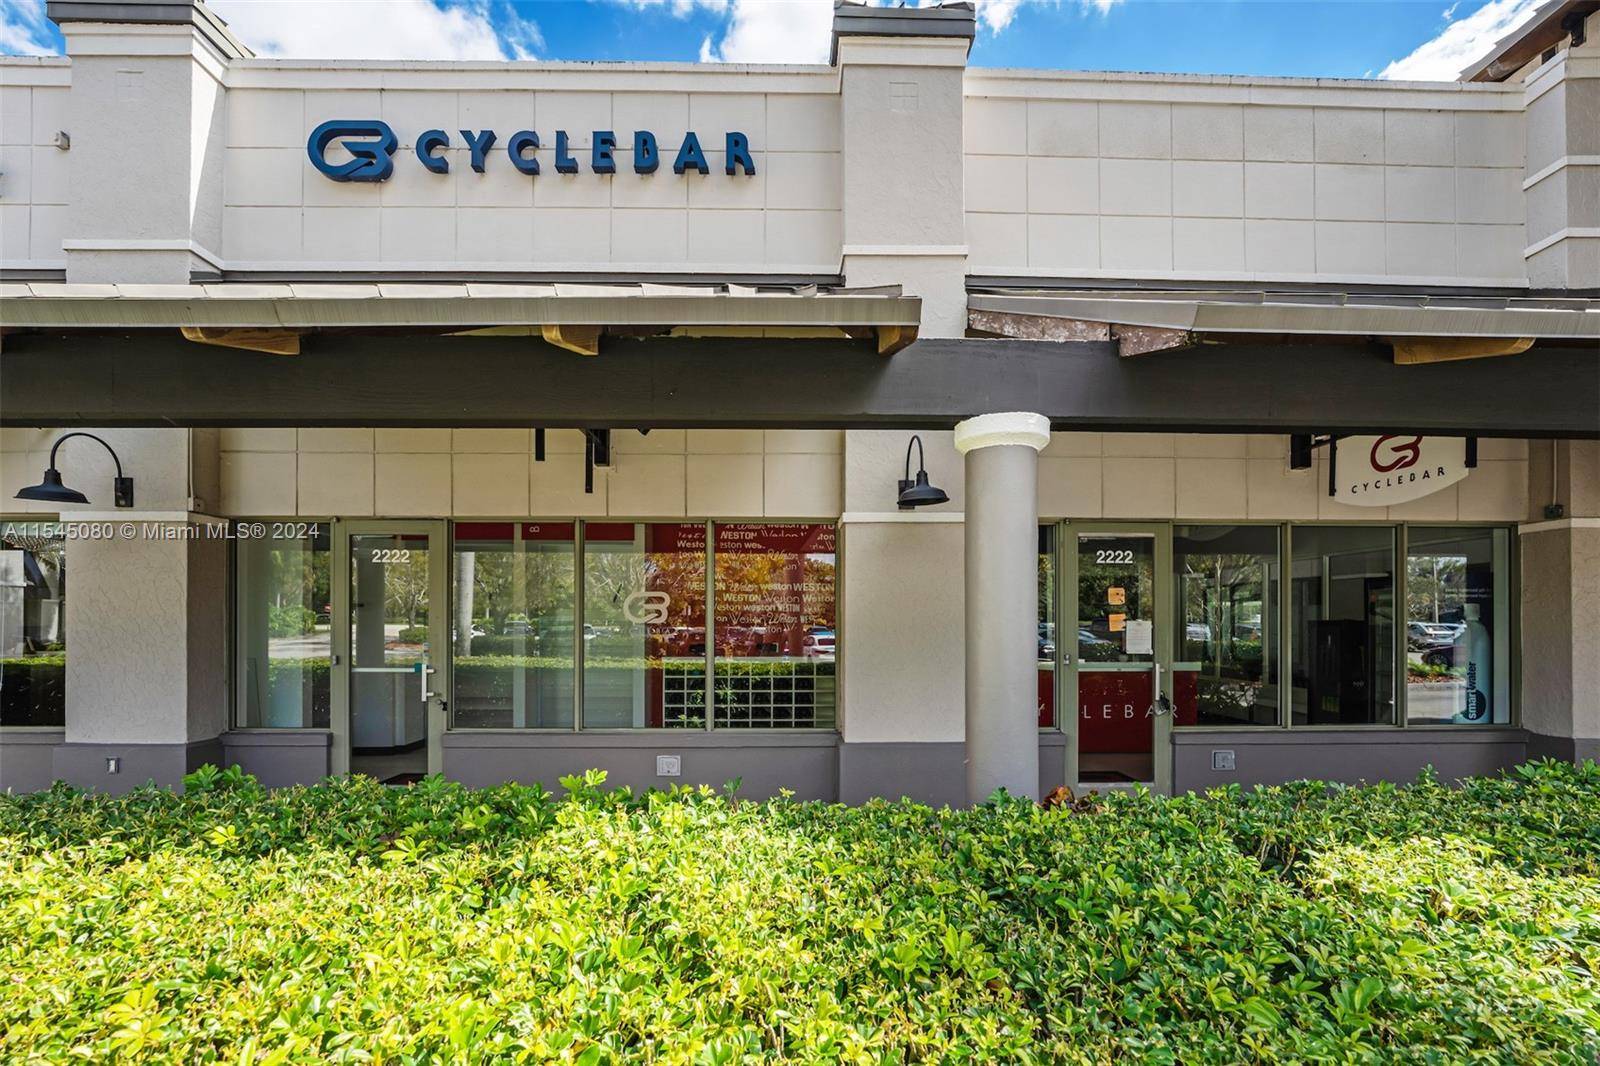 Class A shopping centre located on the main commercial corridor in Weston FL.